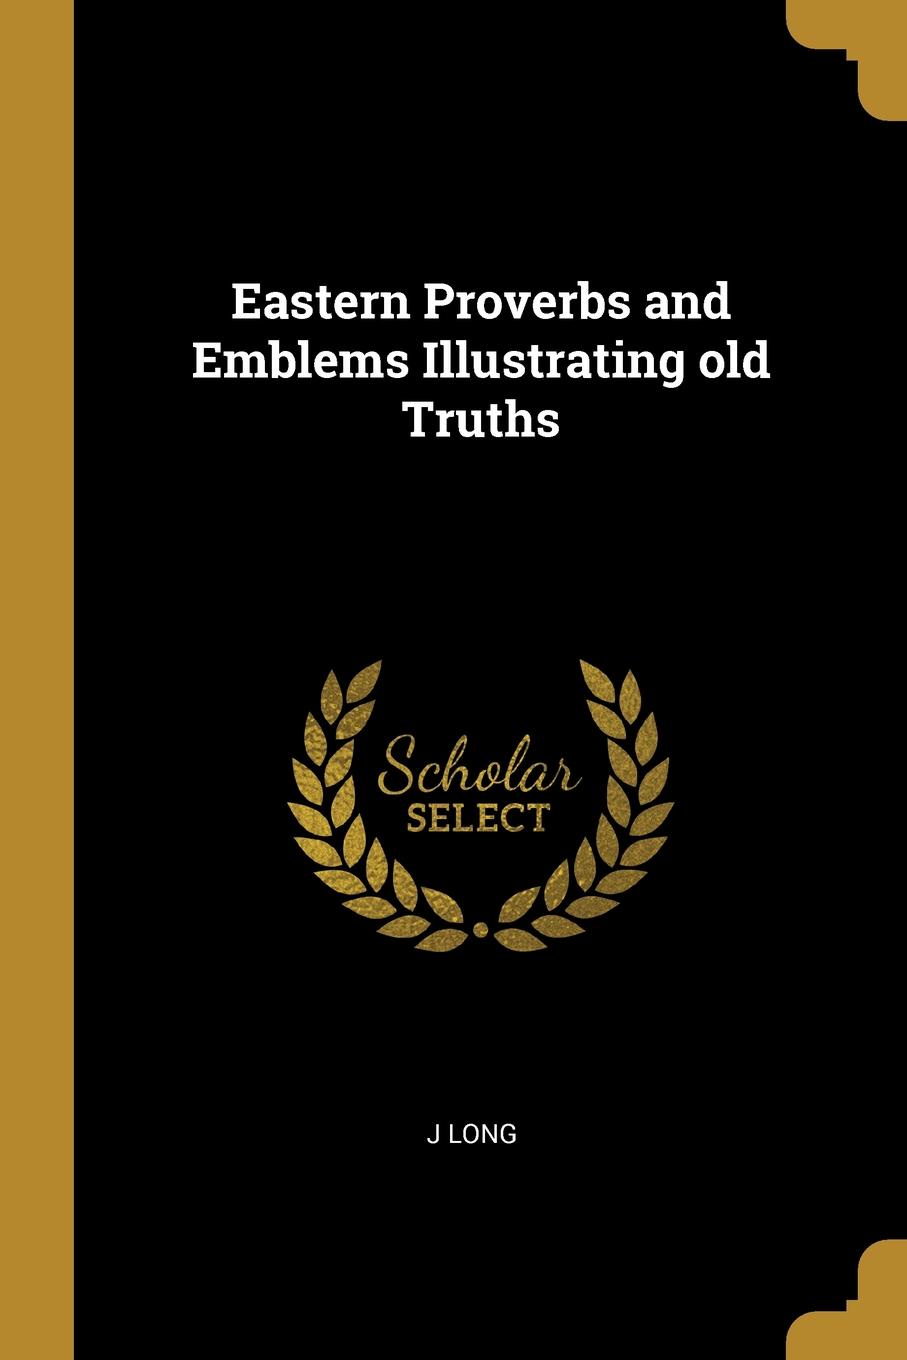 Eastern Proverbs and Emblems Illustrating old Truths